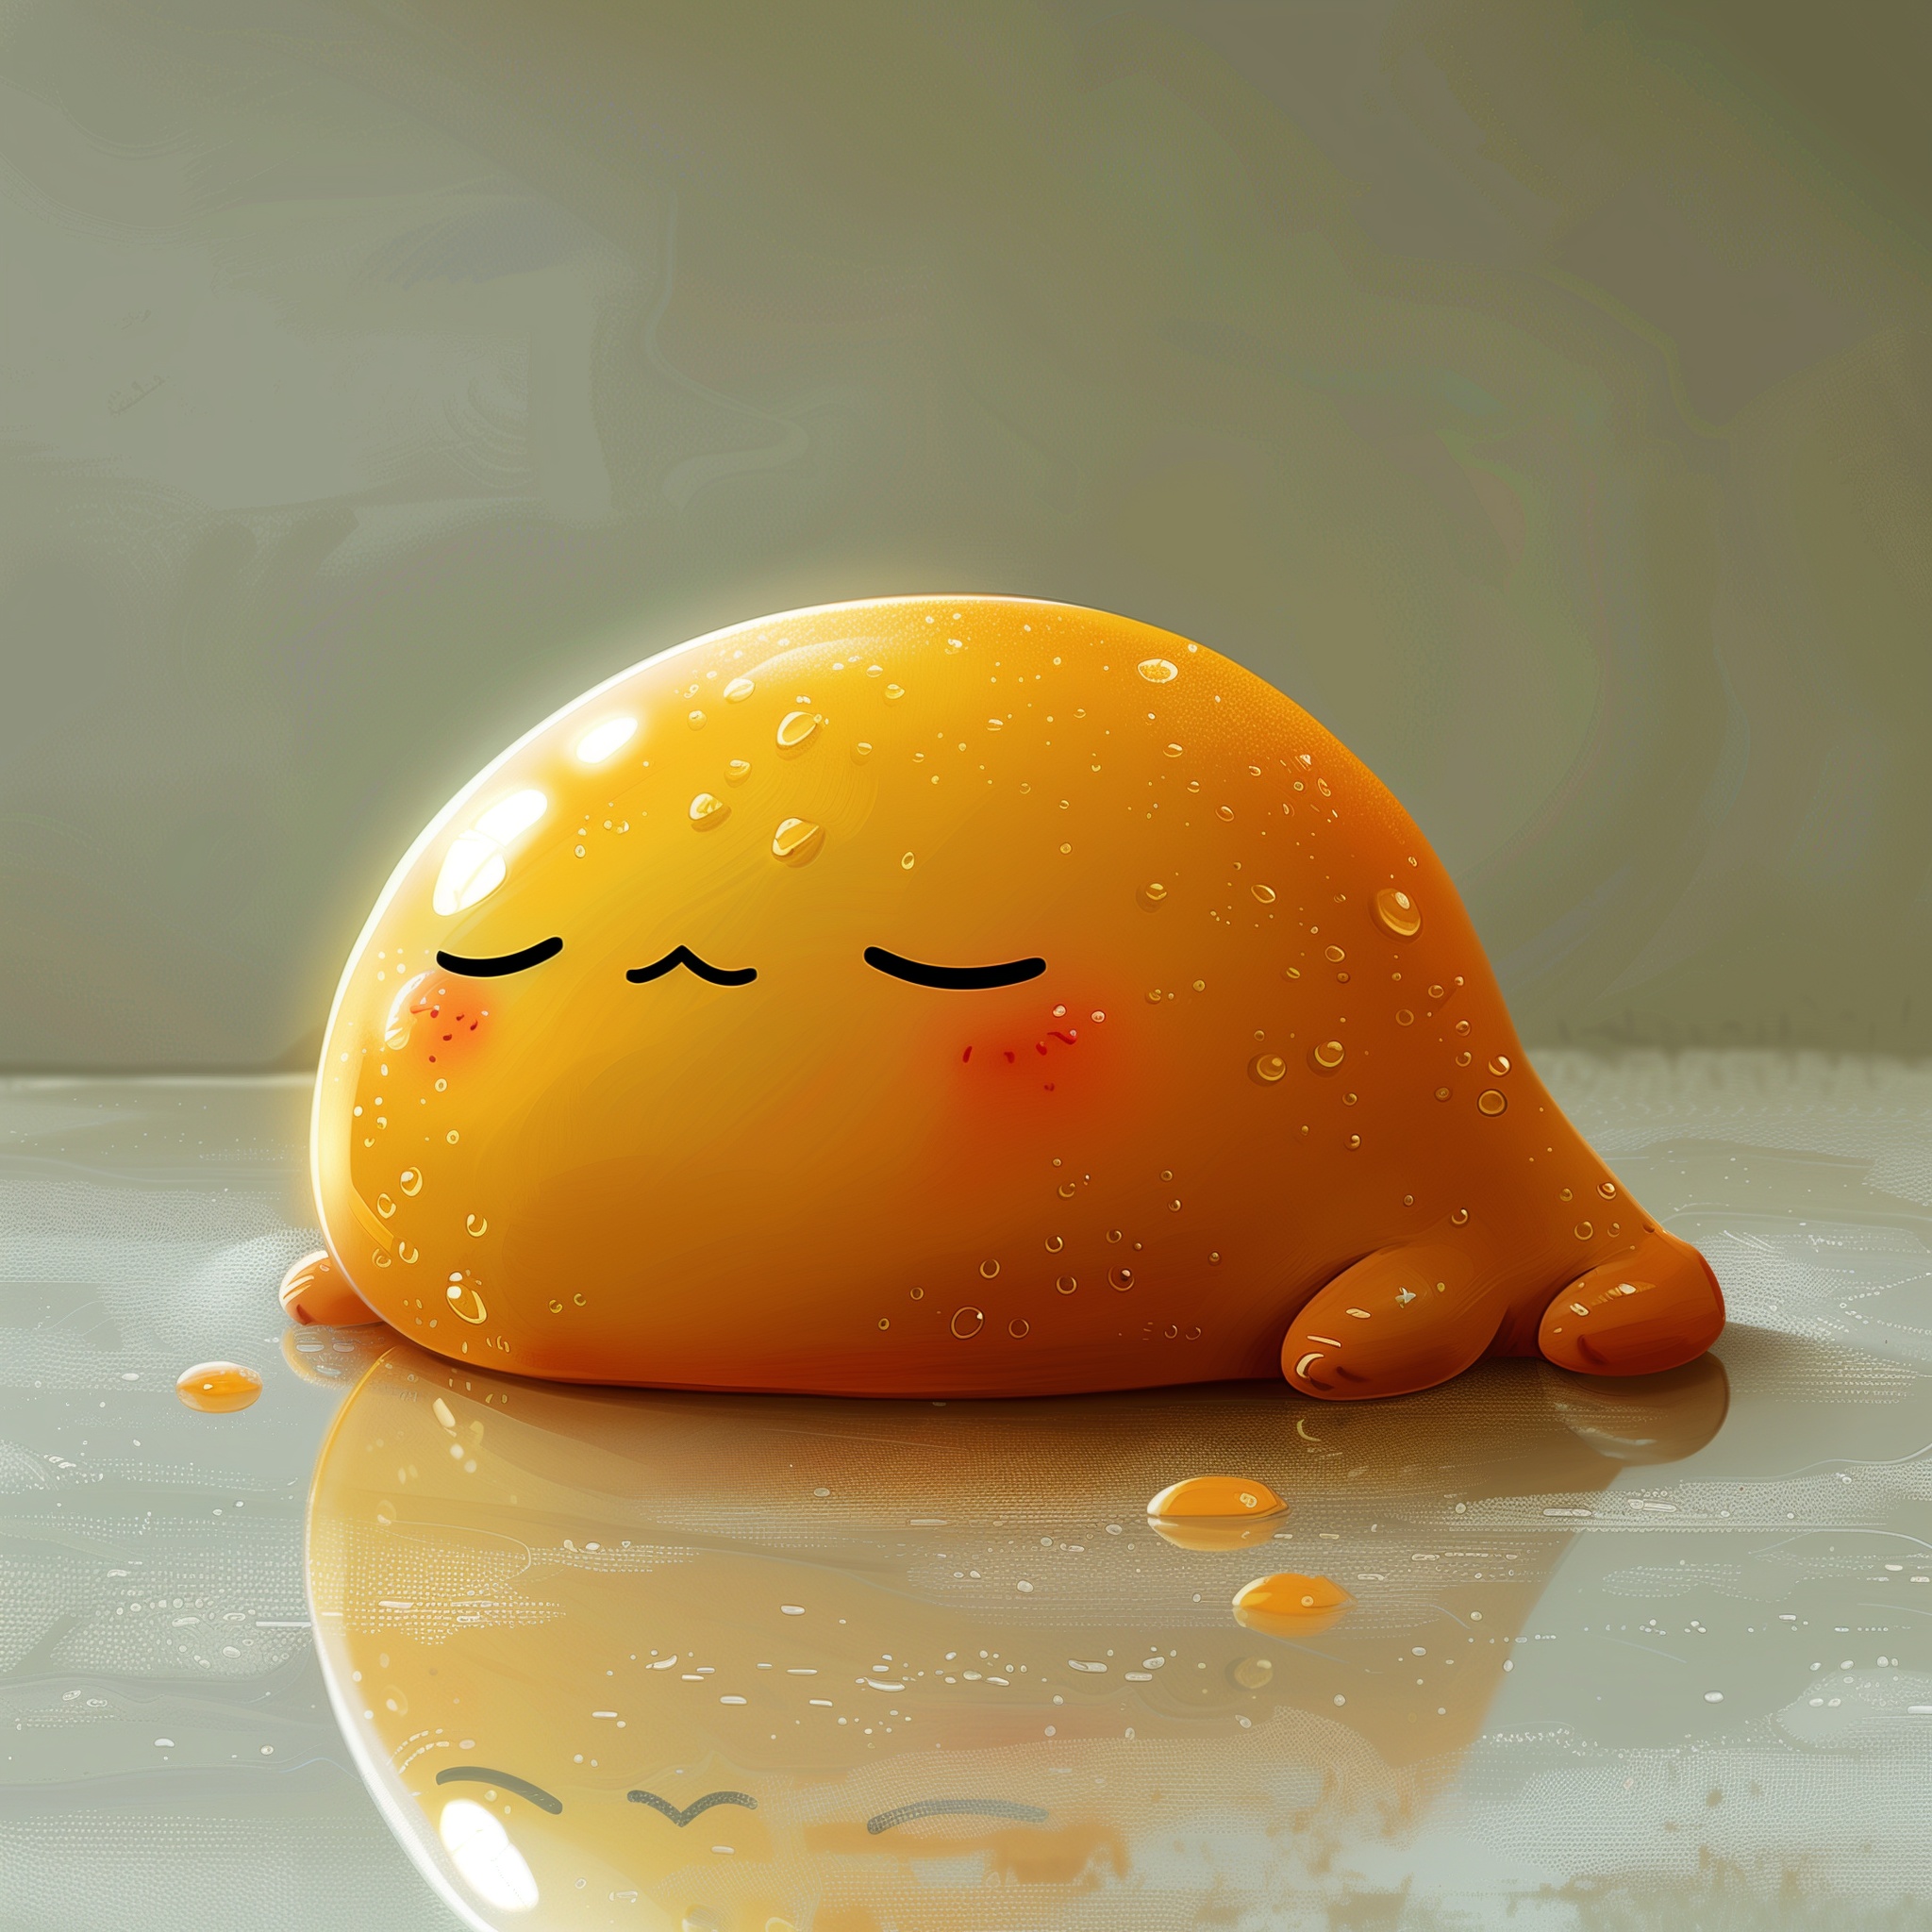 Avatar featuring the cartoon character Gudetama, the lazy egg, looking relaxed with a content expression.